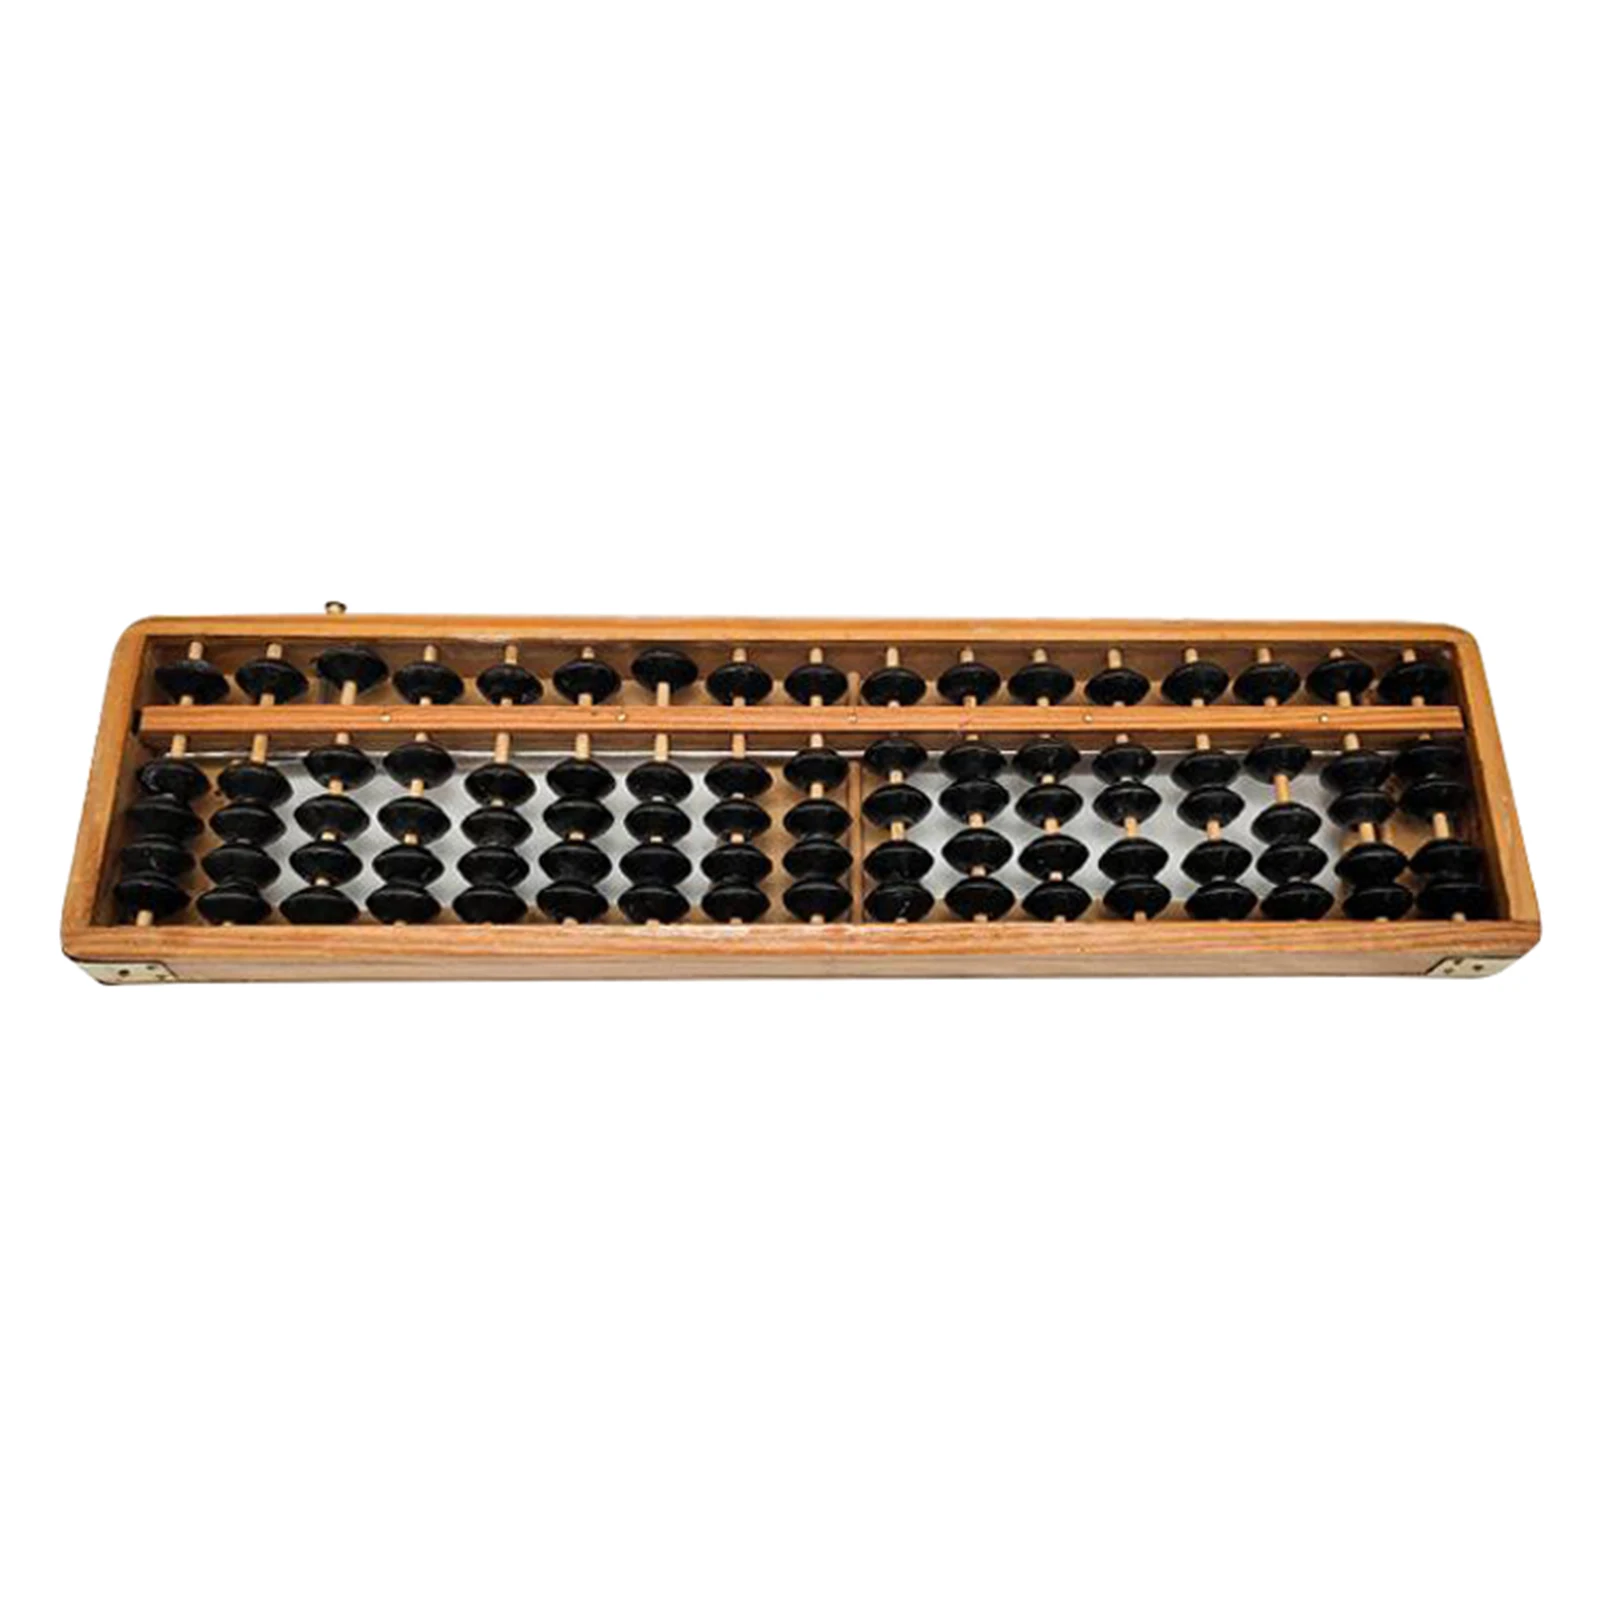 Vintage Style Wooden Abacus Soroban 17 Column Math Professional Abacus for Adults Kids with Reset Button, Anti-Skid Rubber Feet